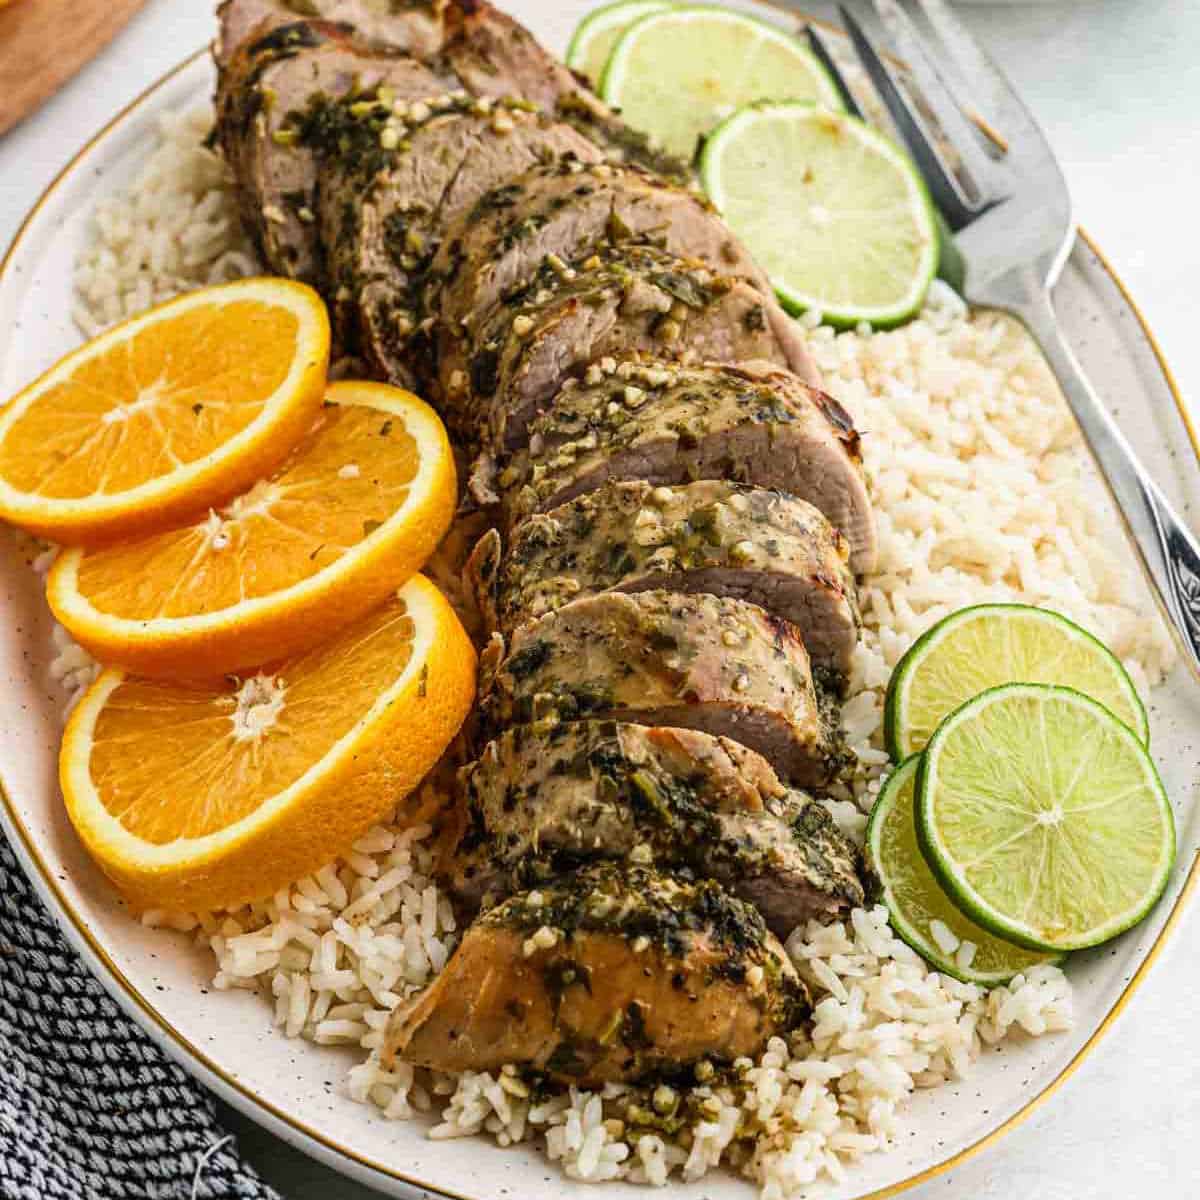 A plate of sliced seasoned Crock Pot Cuban Mojo Pork Tenderloin garnished with orange and lime slices, served over a bed of white rice. A serving fork is placed next to the tenderloin. The dish is presented on a white oval platter with a striped napkin nearby.